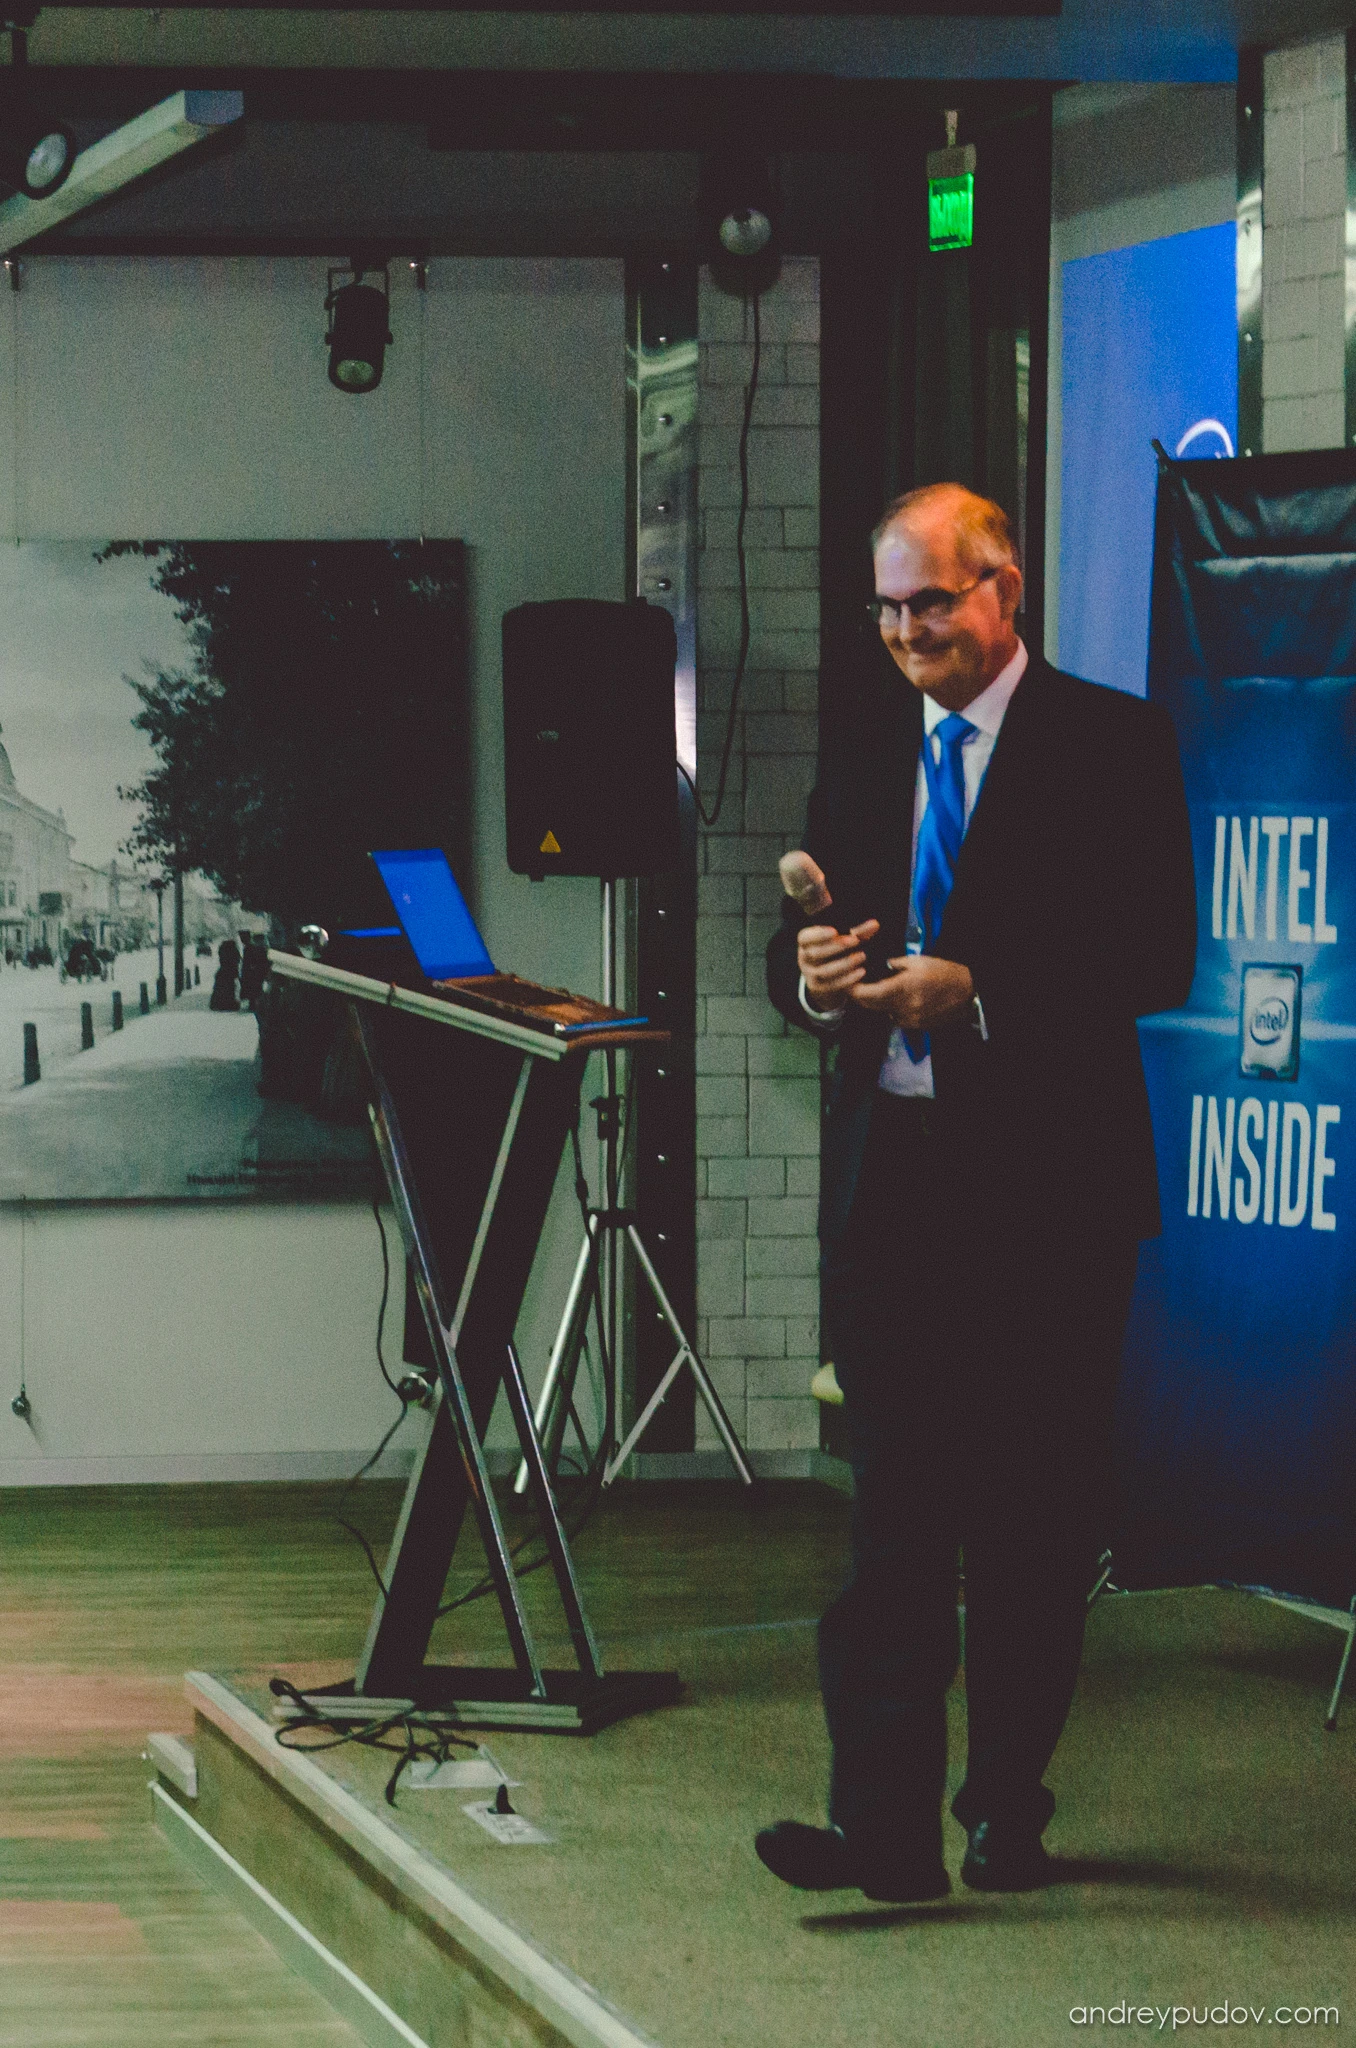 Intel Partners Day - William Savage - General Manager, Corporate Vice President, One Intel Software & Architecture